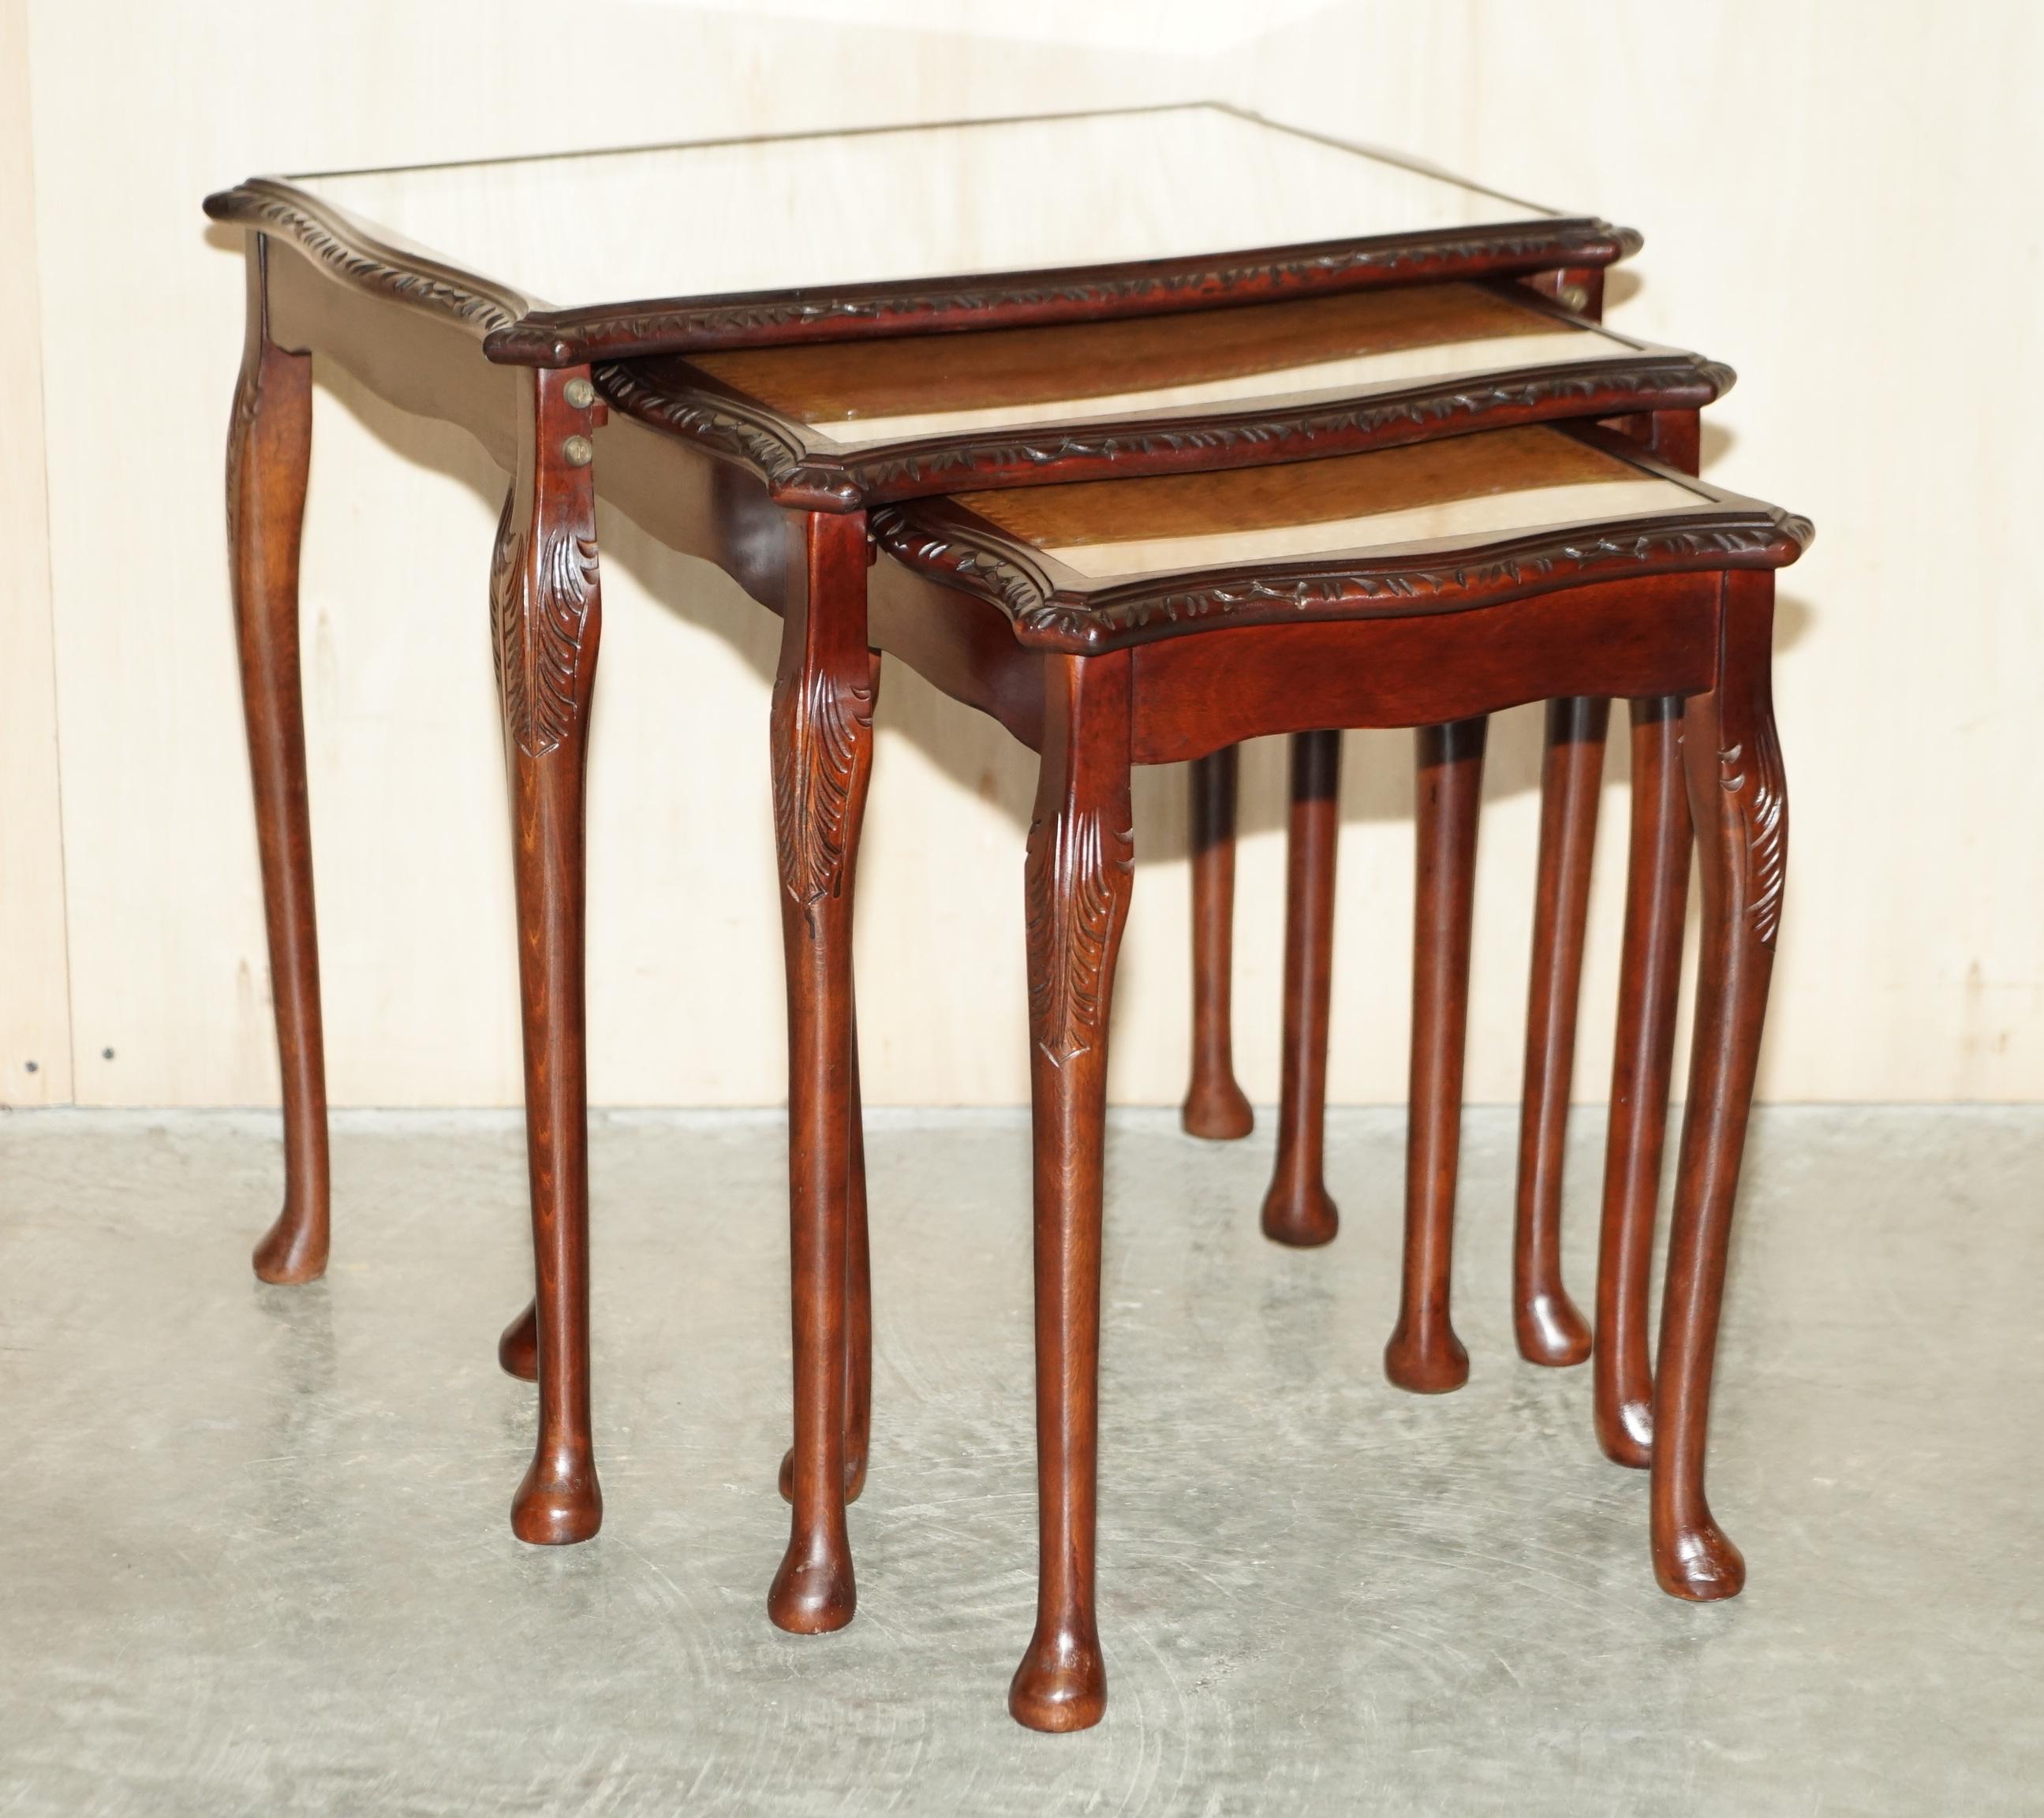 We are delighted to offer for sale this lovely nest of three tables which have gold leaf embossed tan brown leather tops that are protected by glass.

A very good looking and well made nest, each table has a tan leather top which looks very